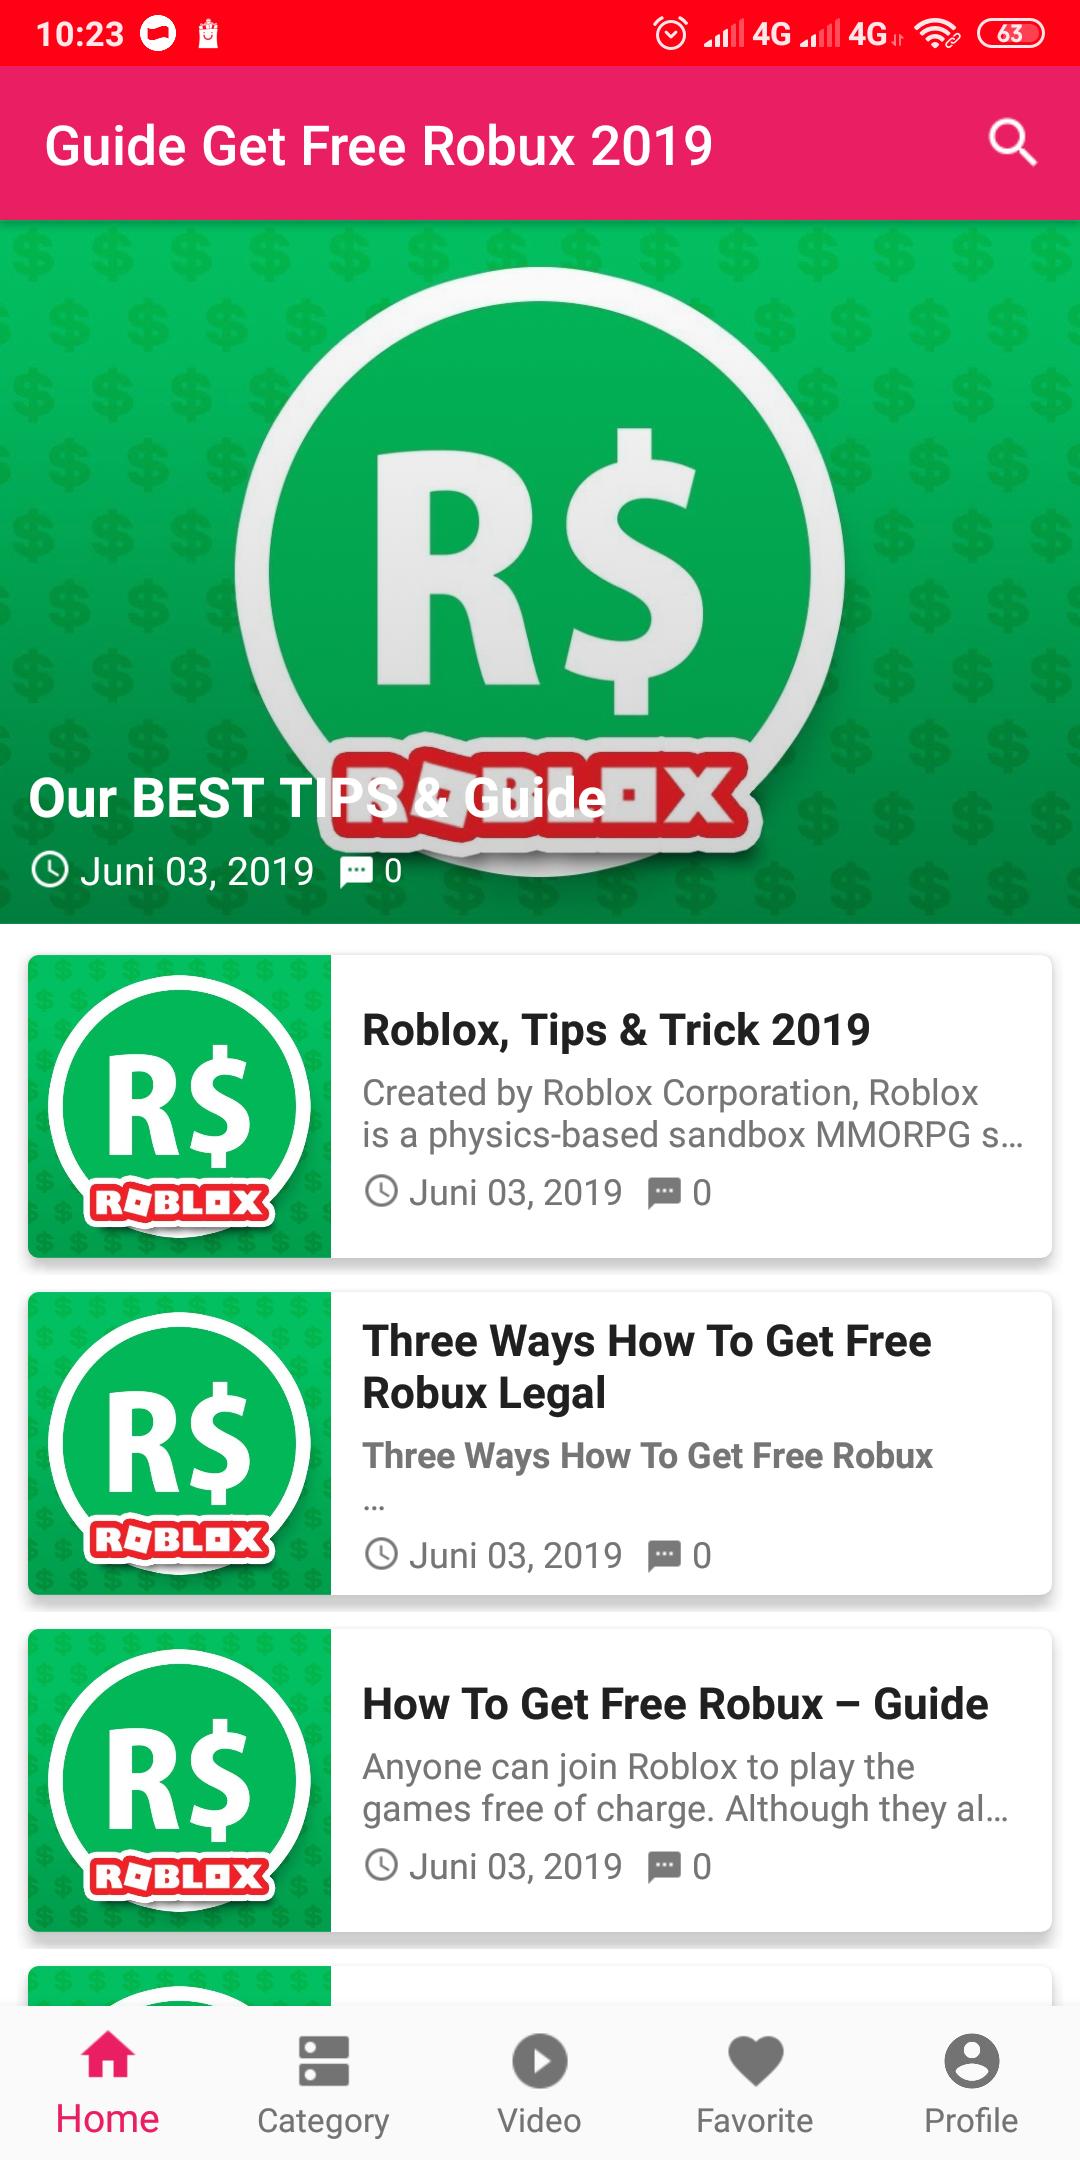 Guide Get Free Robux Best Tips 2k19 For Android Apk Download - get free robux tips ultimate free guide 2k19 apk 10